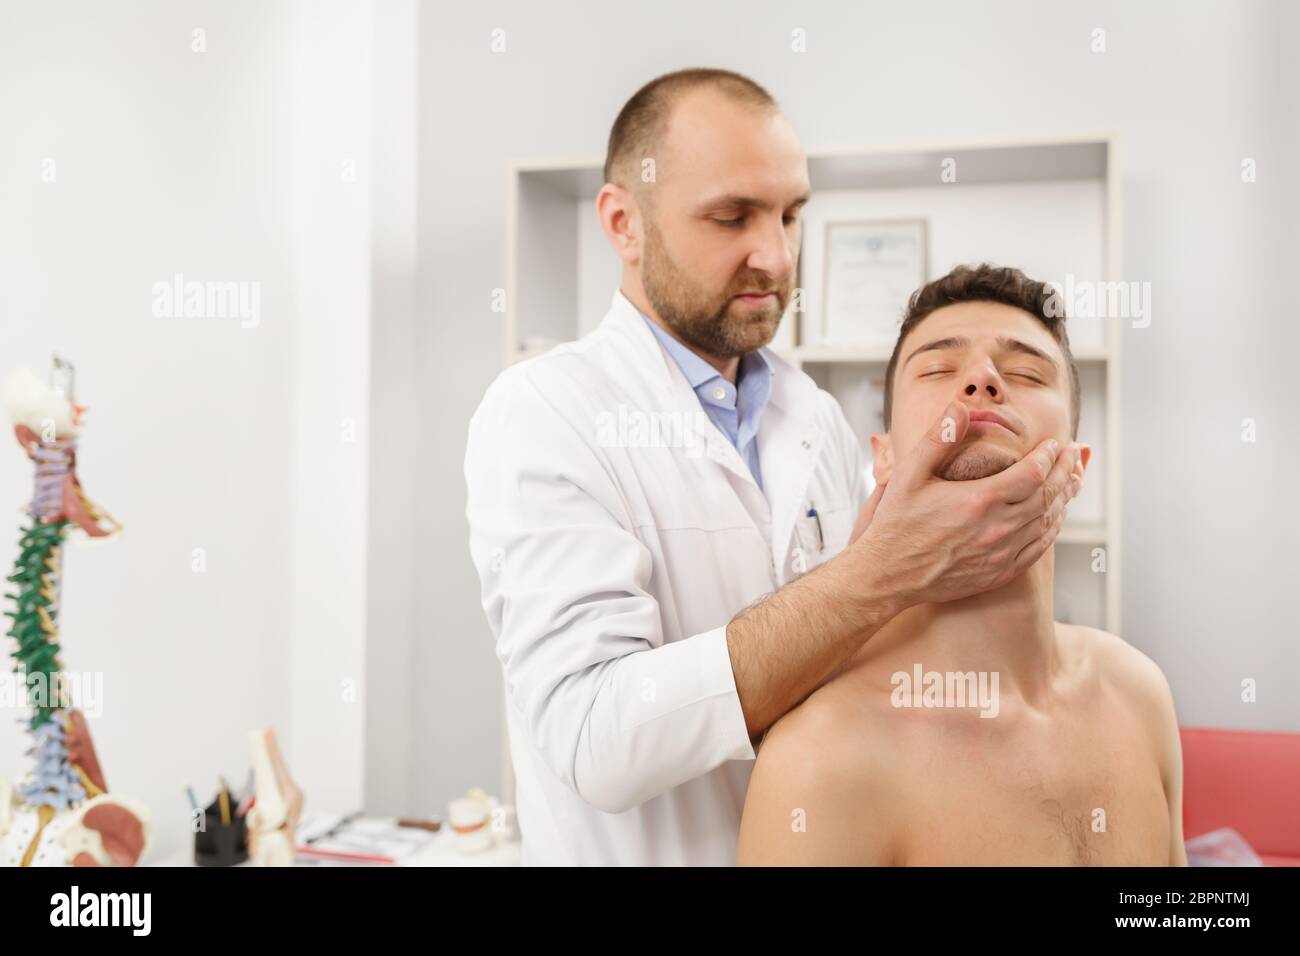 Manual therapist doing manual adjustment on patient's spine. Chiropractic, osteopathy, manual therapy, post traumatic rehabilitation, sport physical Stock Photo